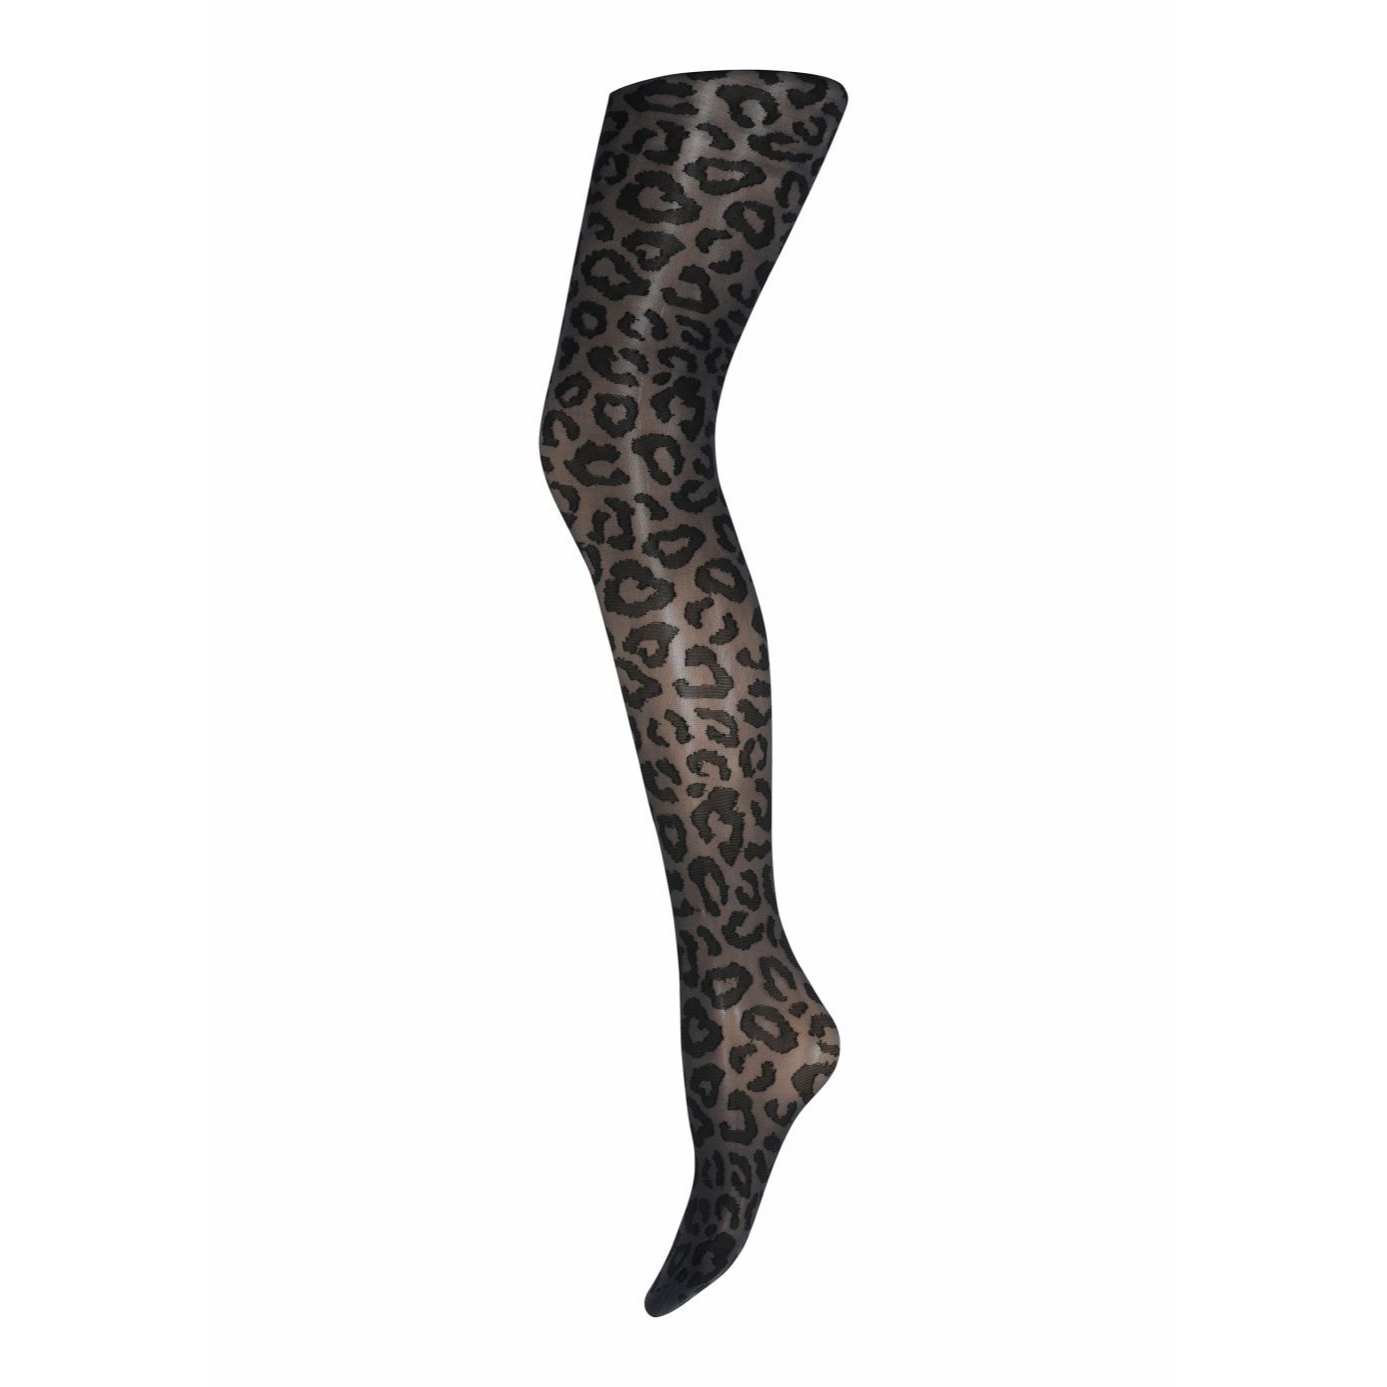 Leopard pantyhose / Anthracite